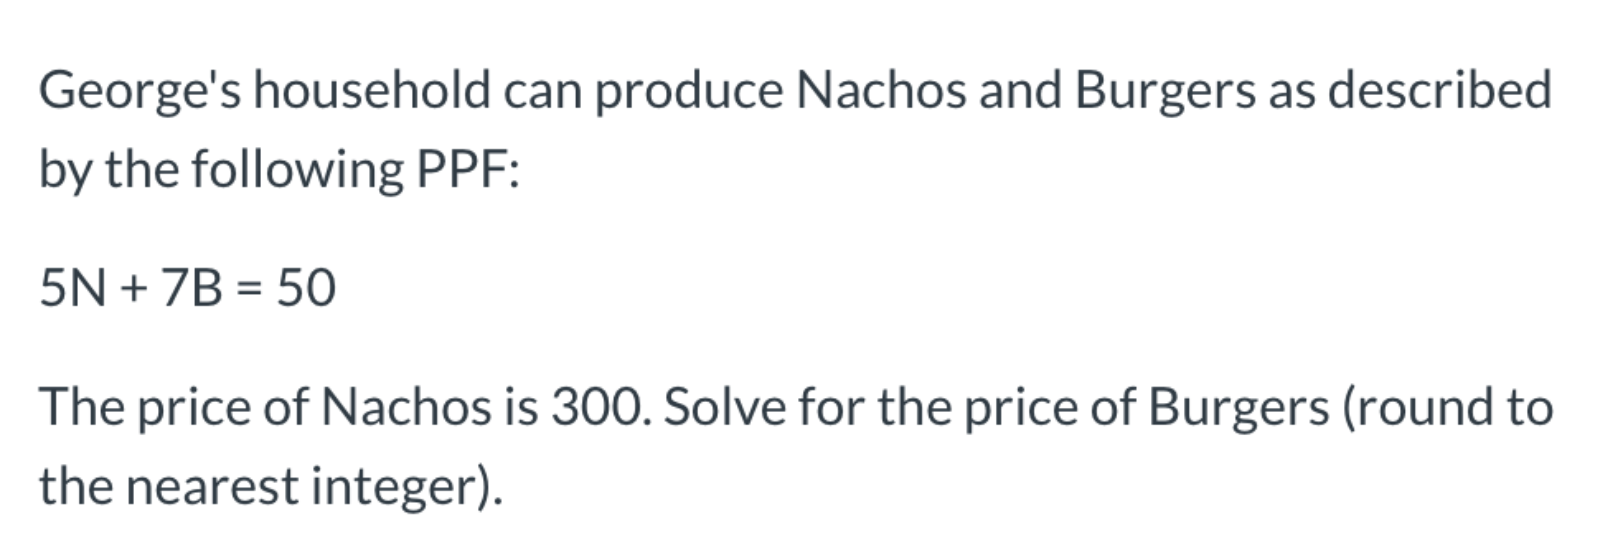 George's household can produce Nachos and Burgers as described
by the following PPF:
5N + 7B = 50
The price of Nachos is 300. Solve for the price of Burgers (round to
the nearest integer).
